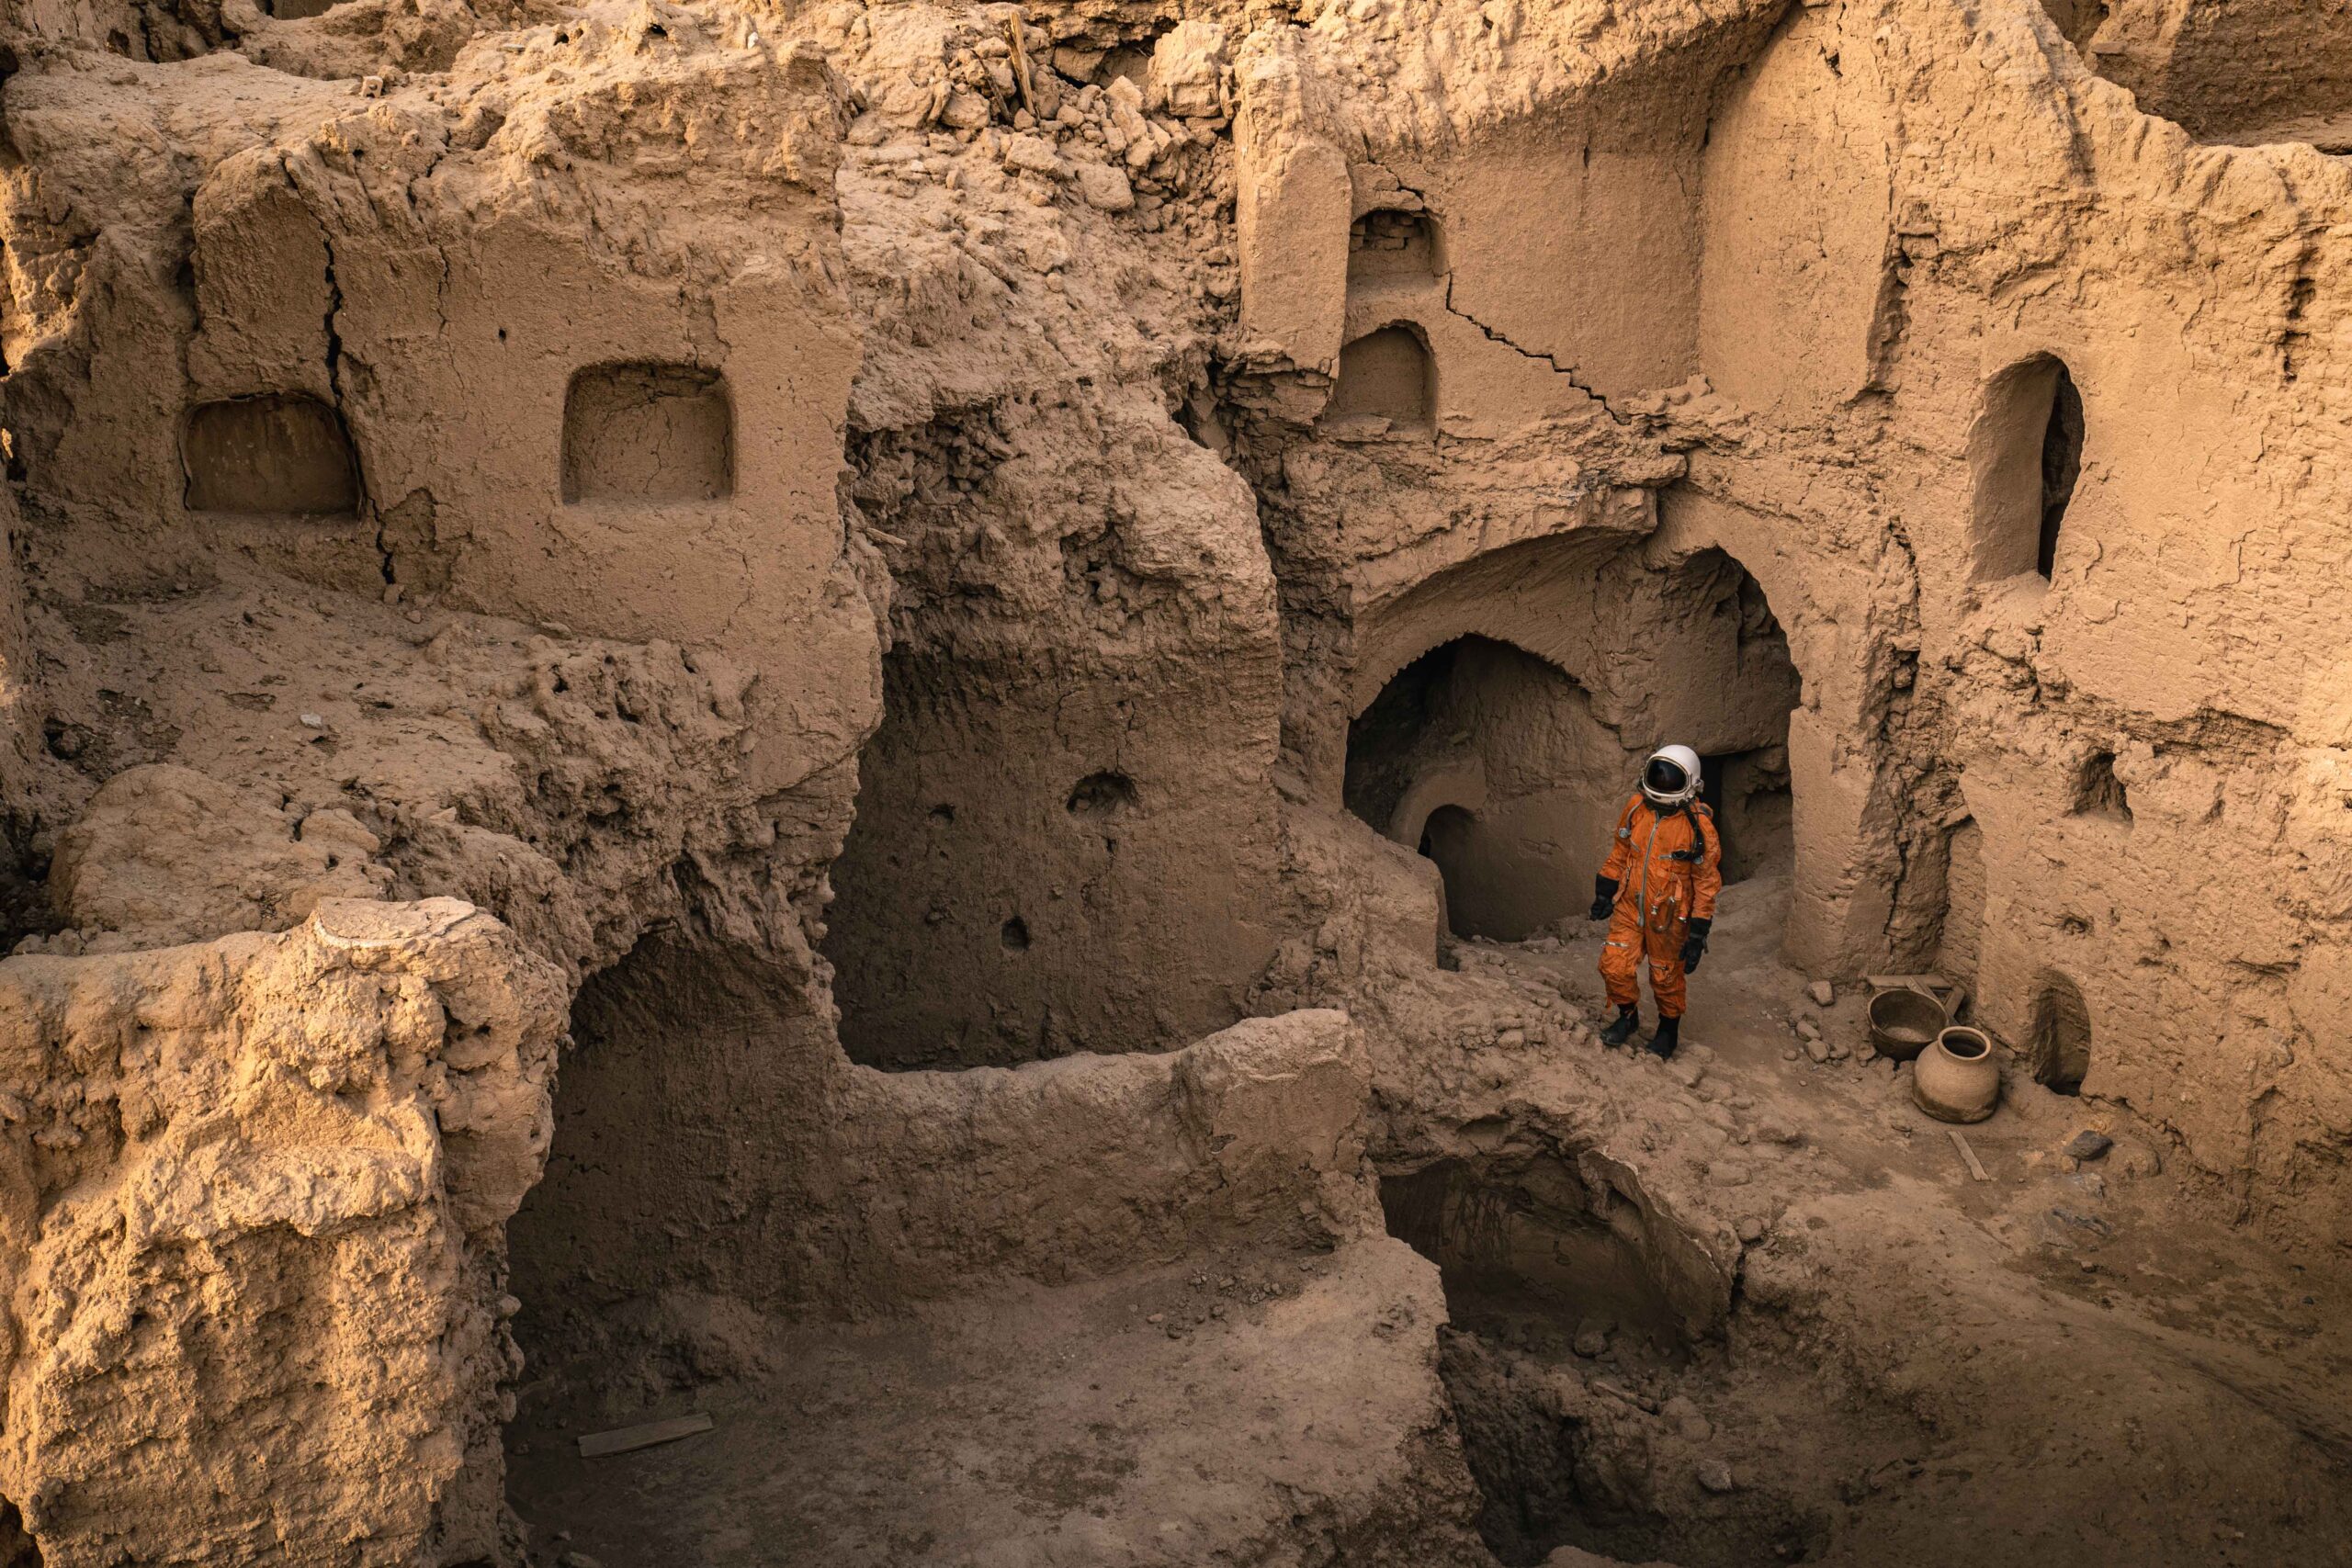 Inside the ancient ruins of a castle in central Iran